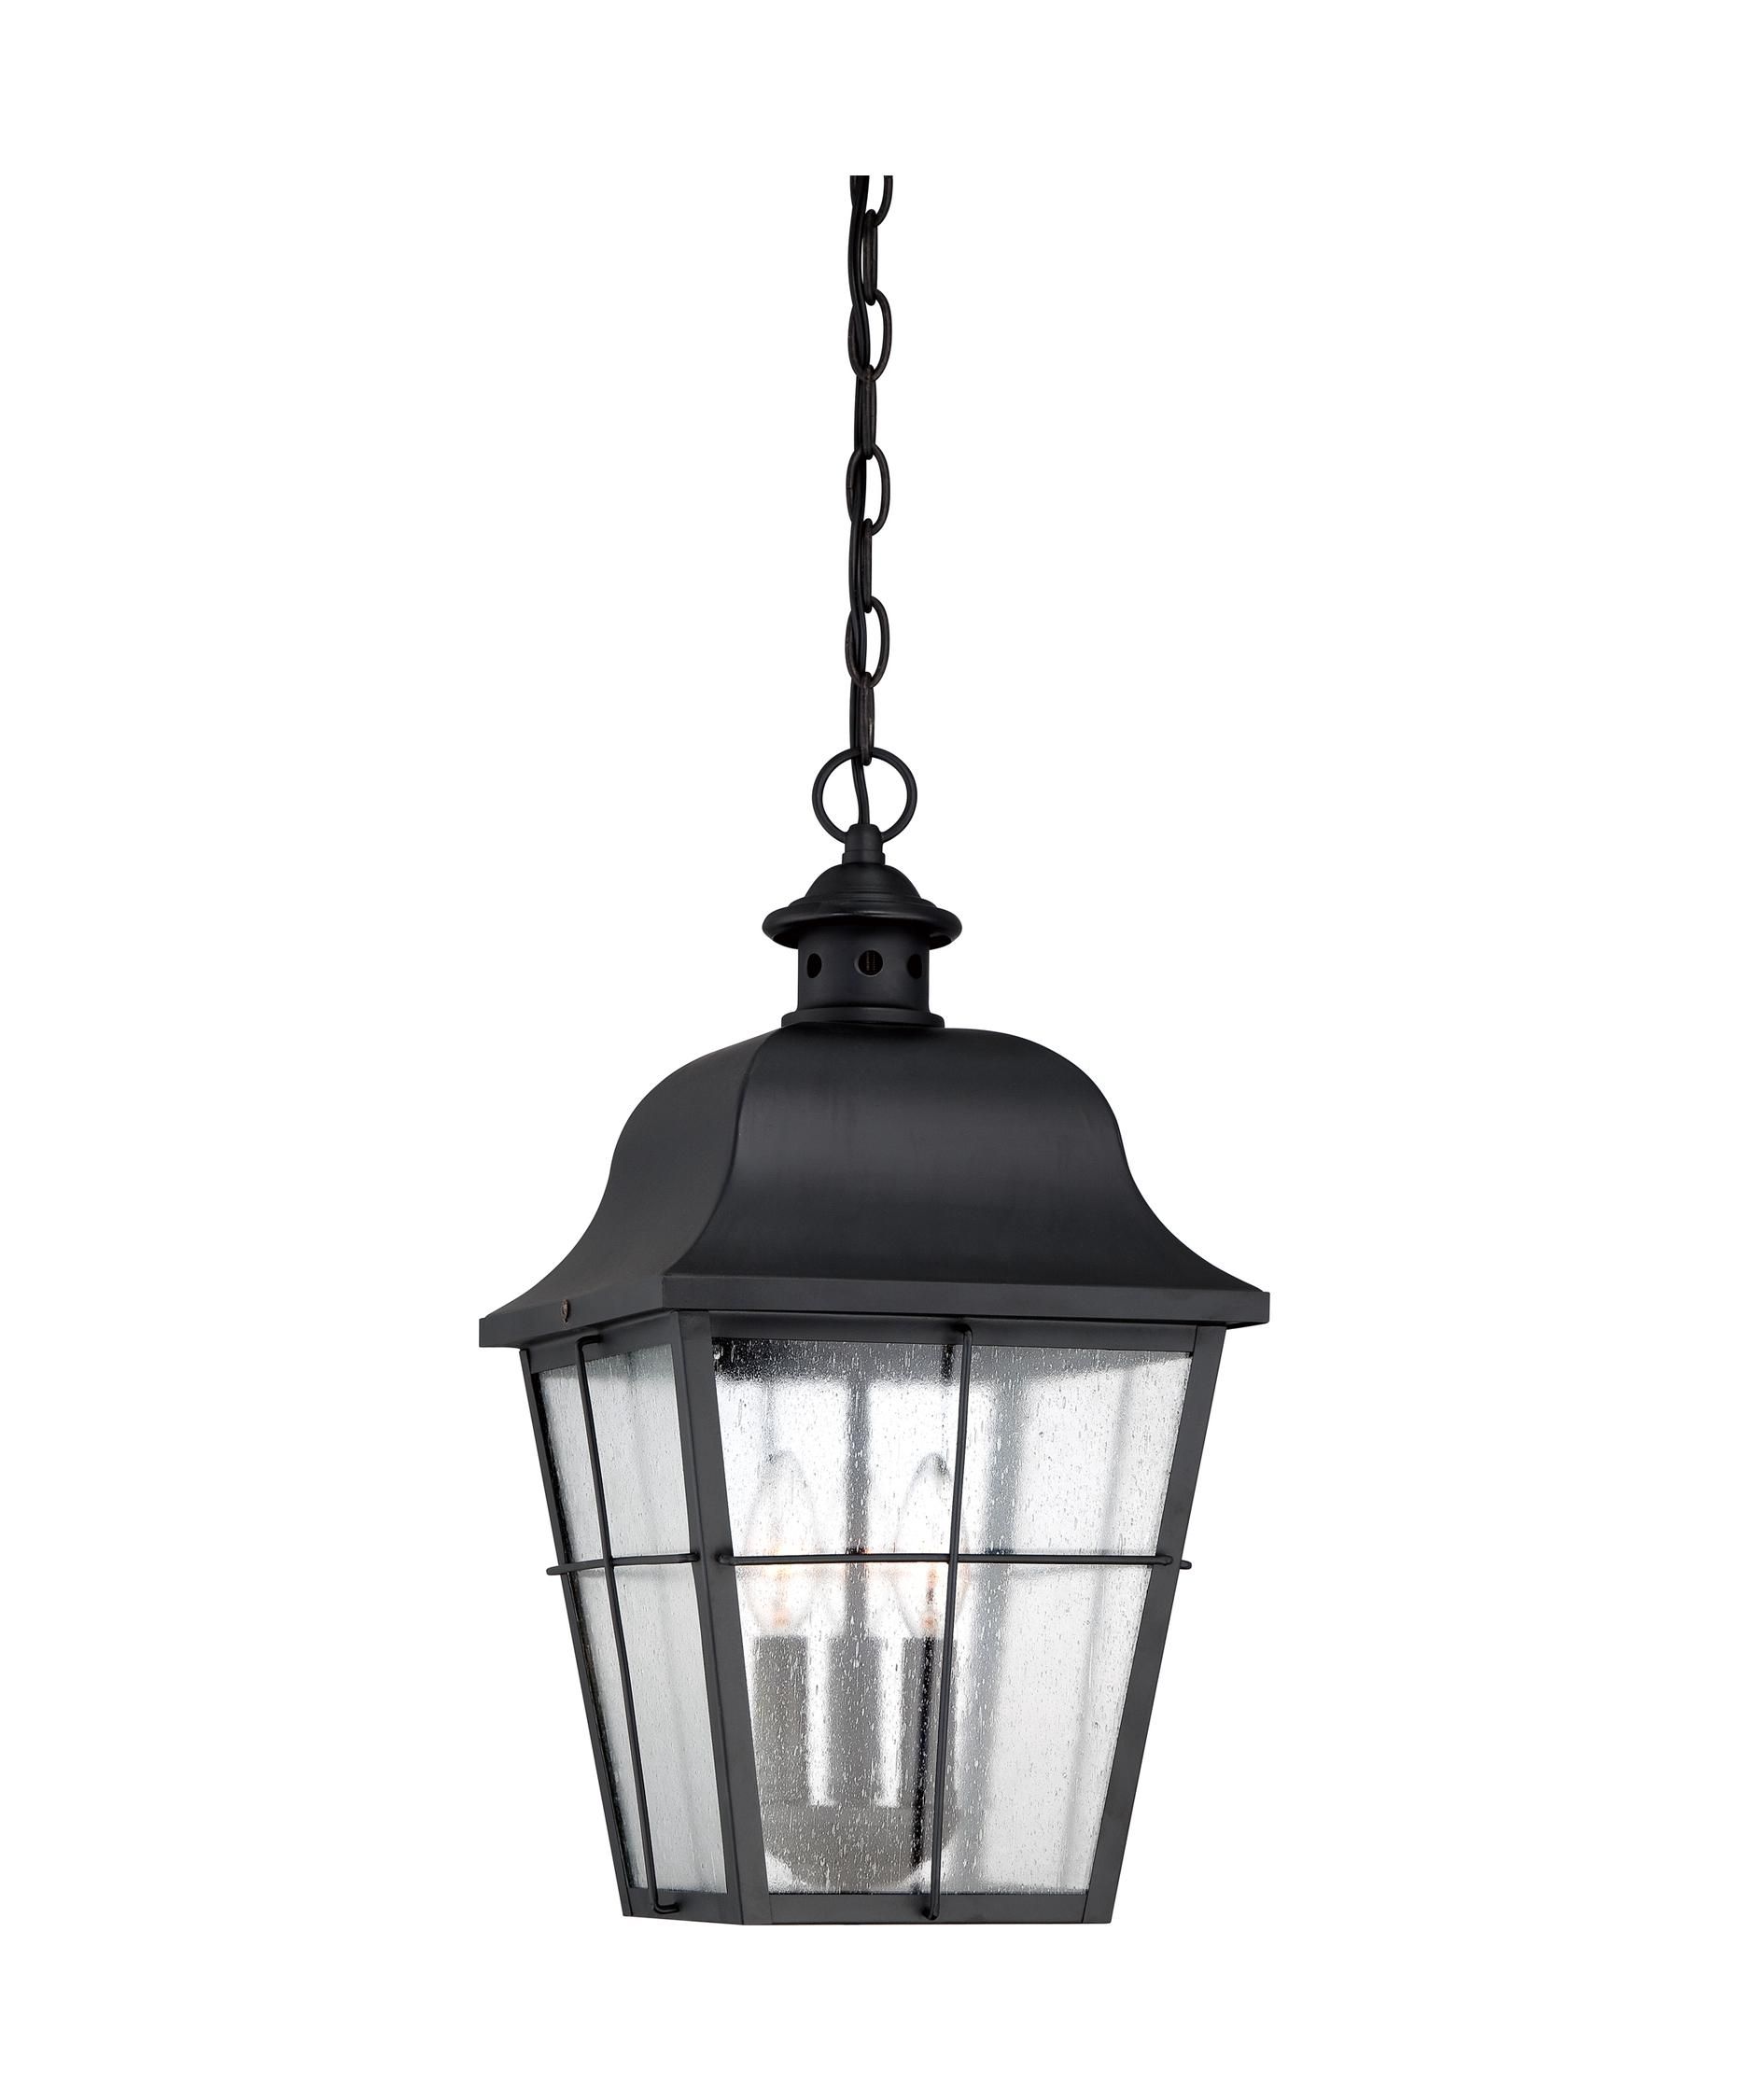 Quoizel Mhe1910 Millhouse 10 Inch Wide 3 Light Outdoor Hanging Within Quoizel Outdoor Hanging Lights (Photo 9 of 15)